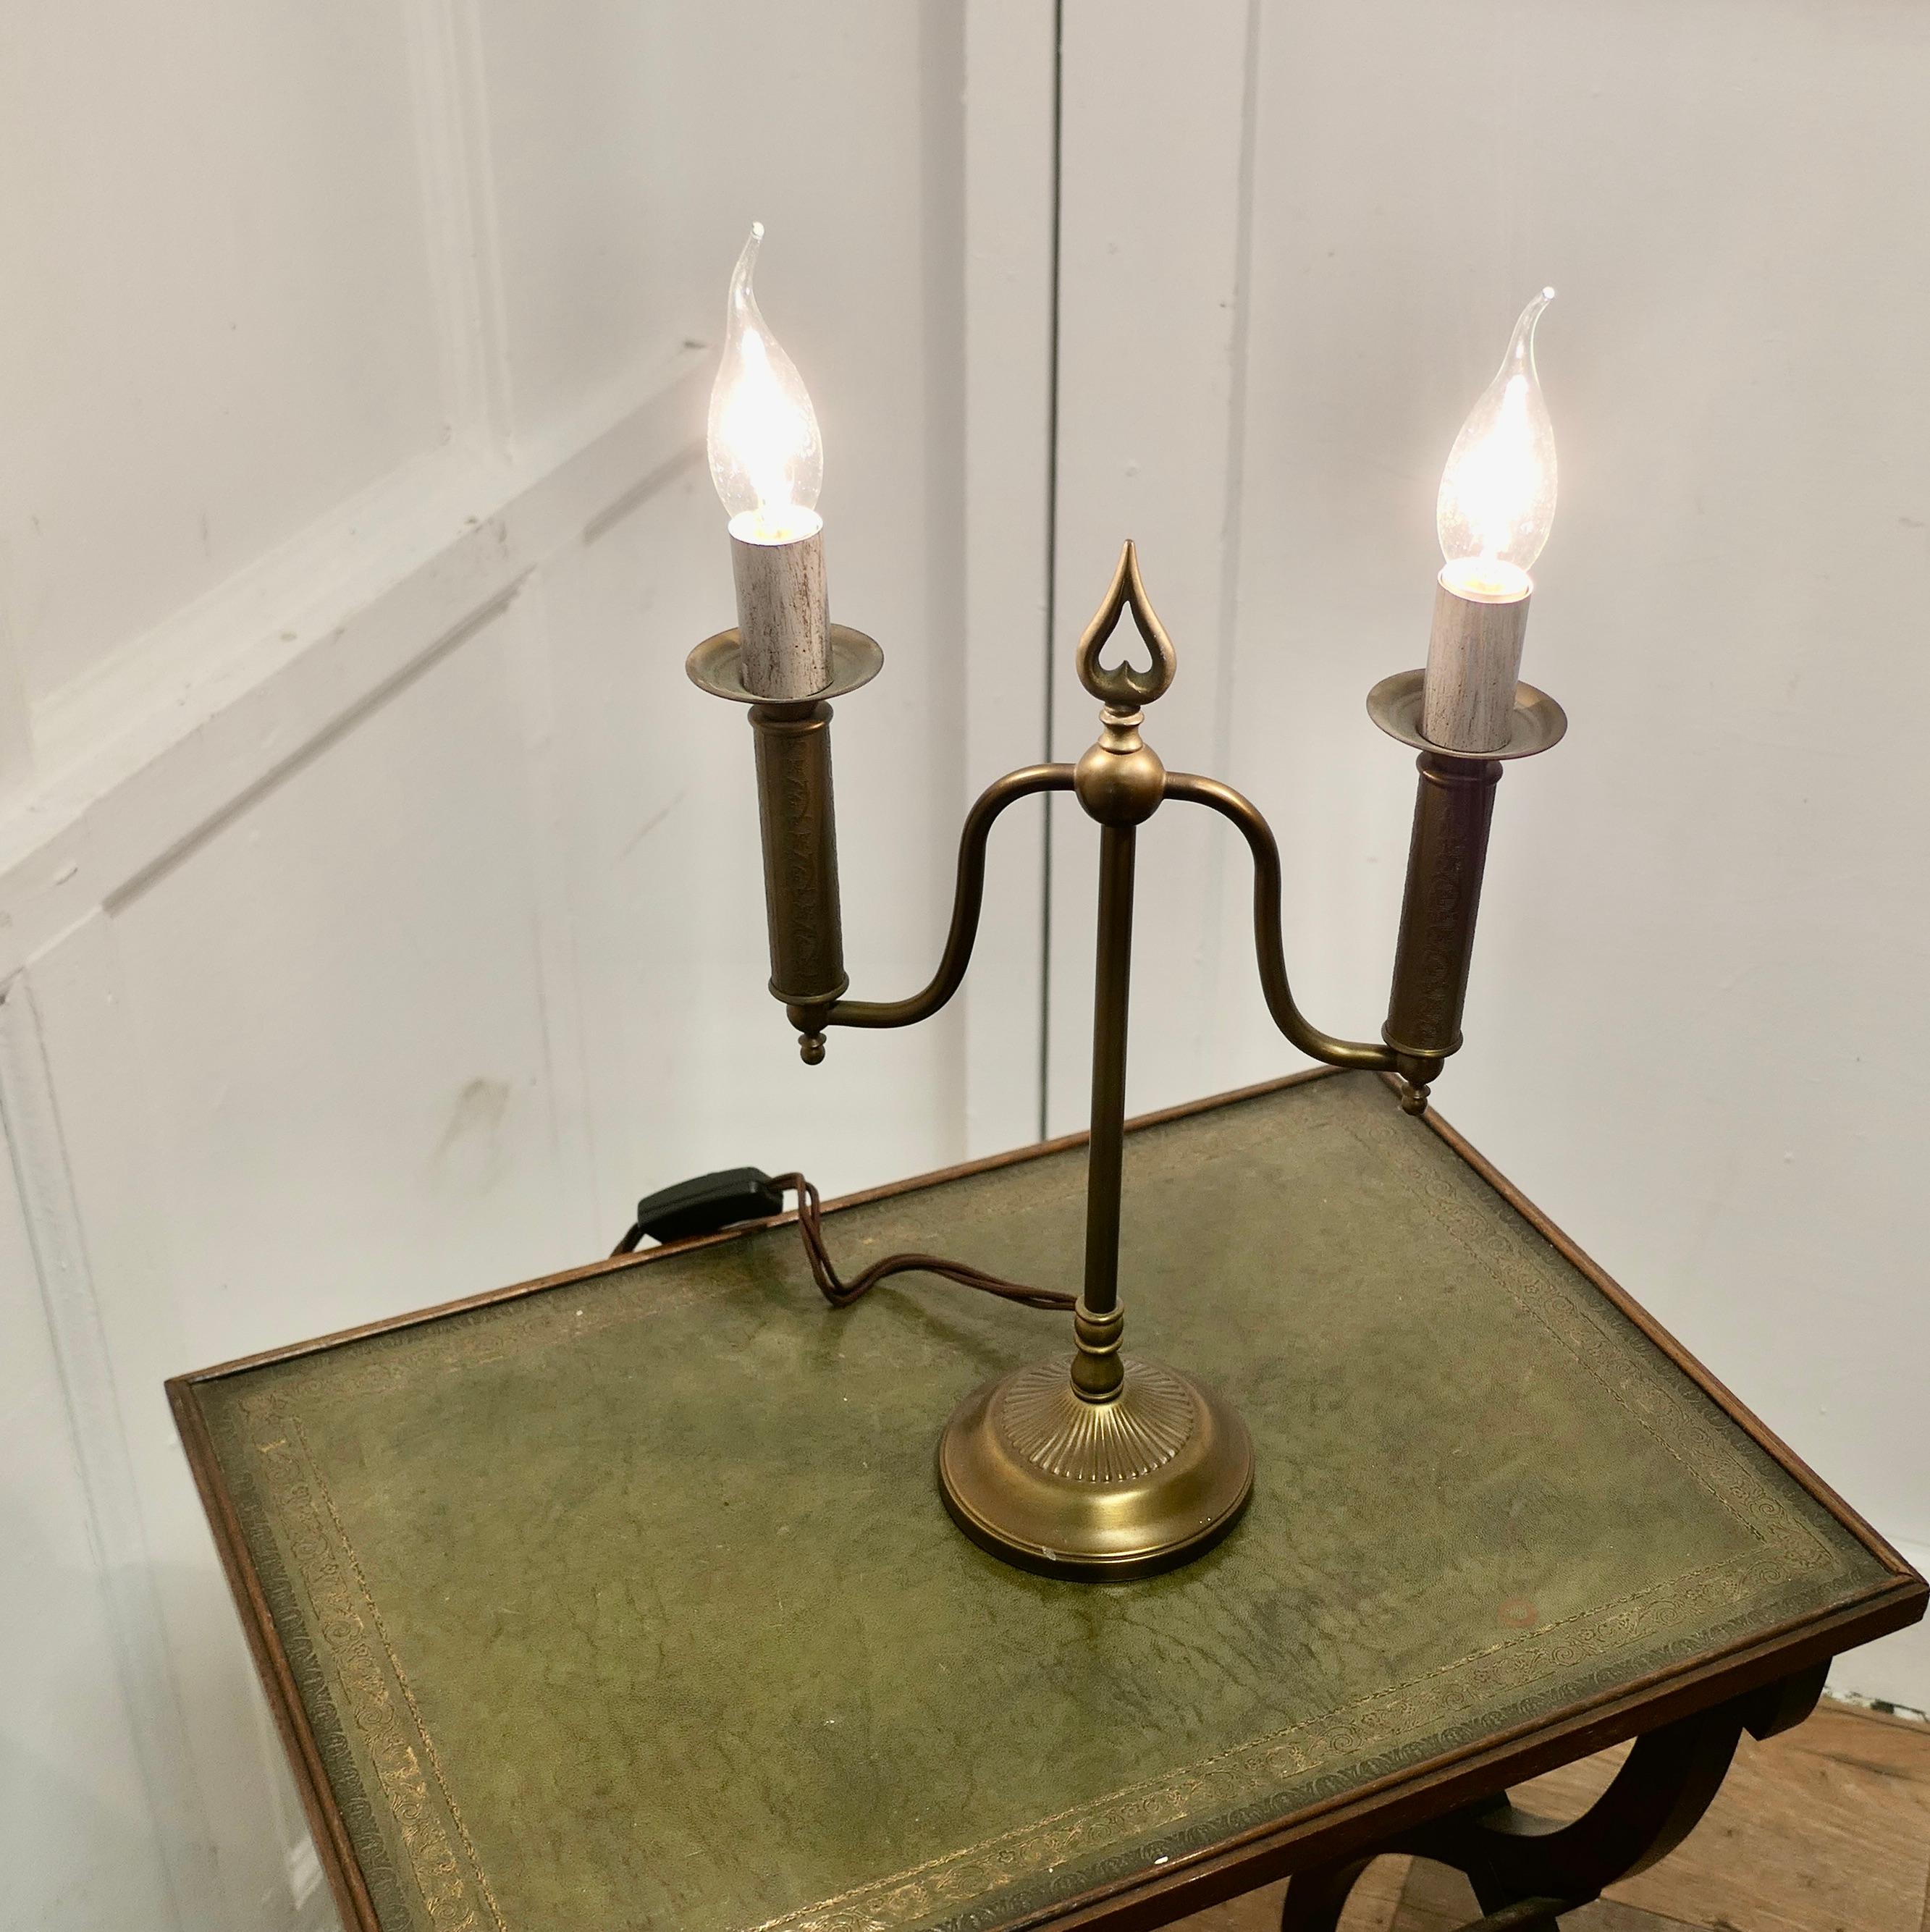 Arts and Crafts Brass Candelabra 2 Branch Lamp

This is a simple and attractive design, the lamp has a slender fluted upright set on a round base which supports a 2 branch candelabra with a Spear Head 

The lamp has relatively new wiring and is in